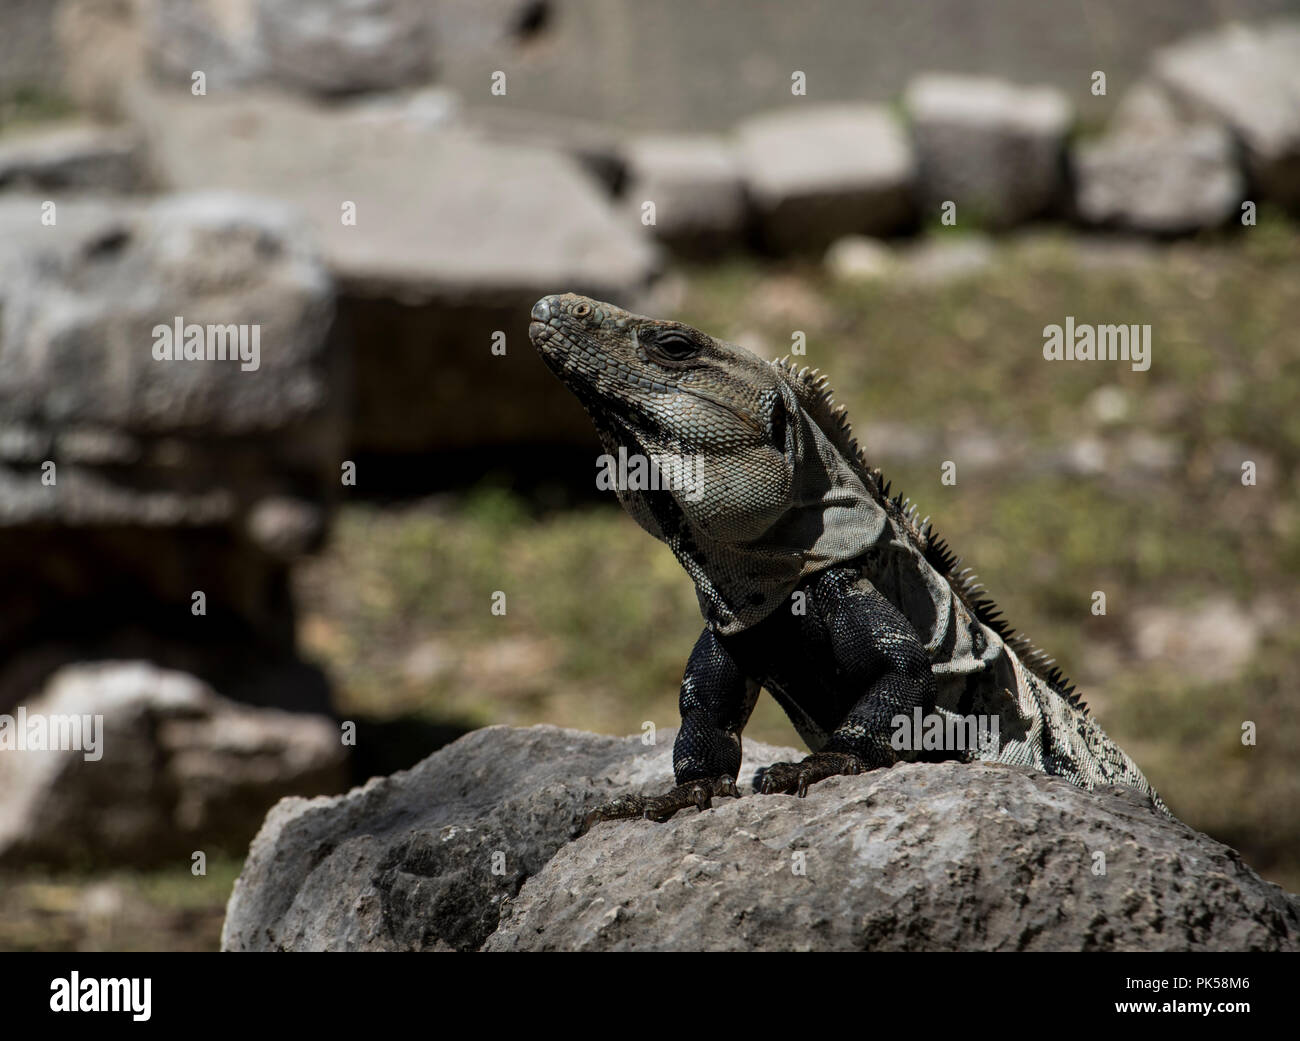 Lizard sun bathing on the rocks. Reptile with wrinkled skin and stones in the background. Mexican Iguana. Stock Photo